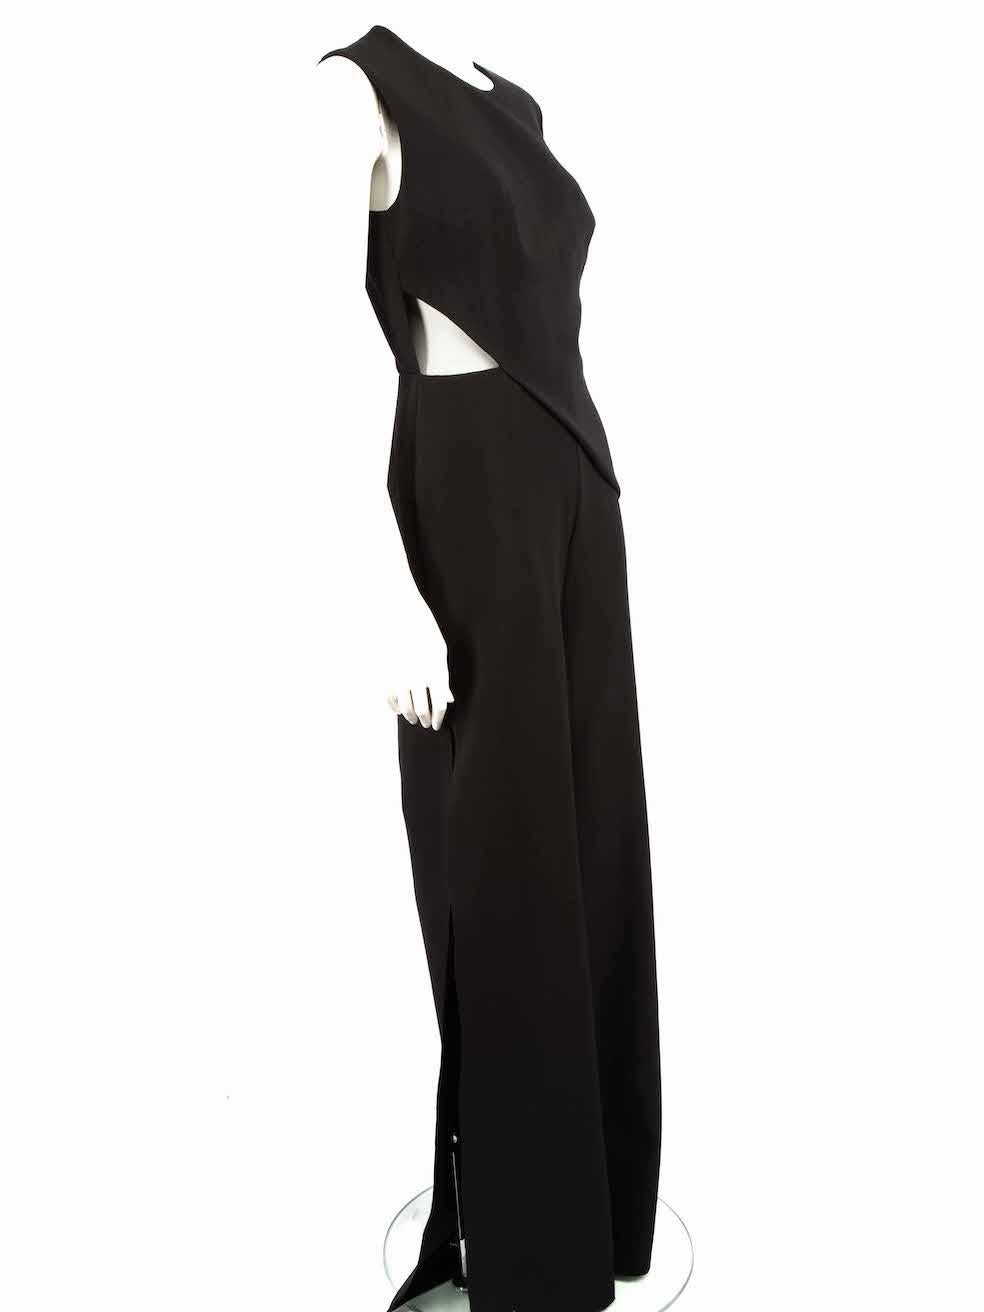 CONDITION is Very good. Hardly any visible wear to jumpsuit is evident on this used Honayda designer resale item.
 
 
 
 Details
 
 
 Black
 
 Synthetic
 
 Jumpsuit
 
 One sleeve
 
 Round neck
 
 Side cut out detail
 
 Side leg slits
 
 Back hook